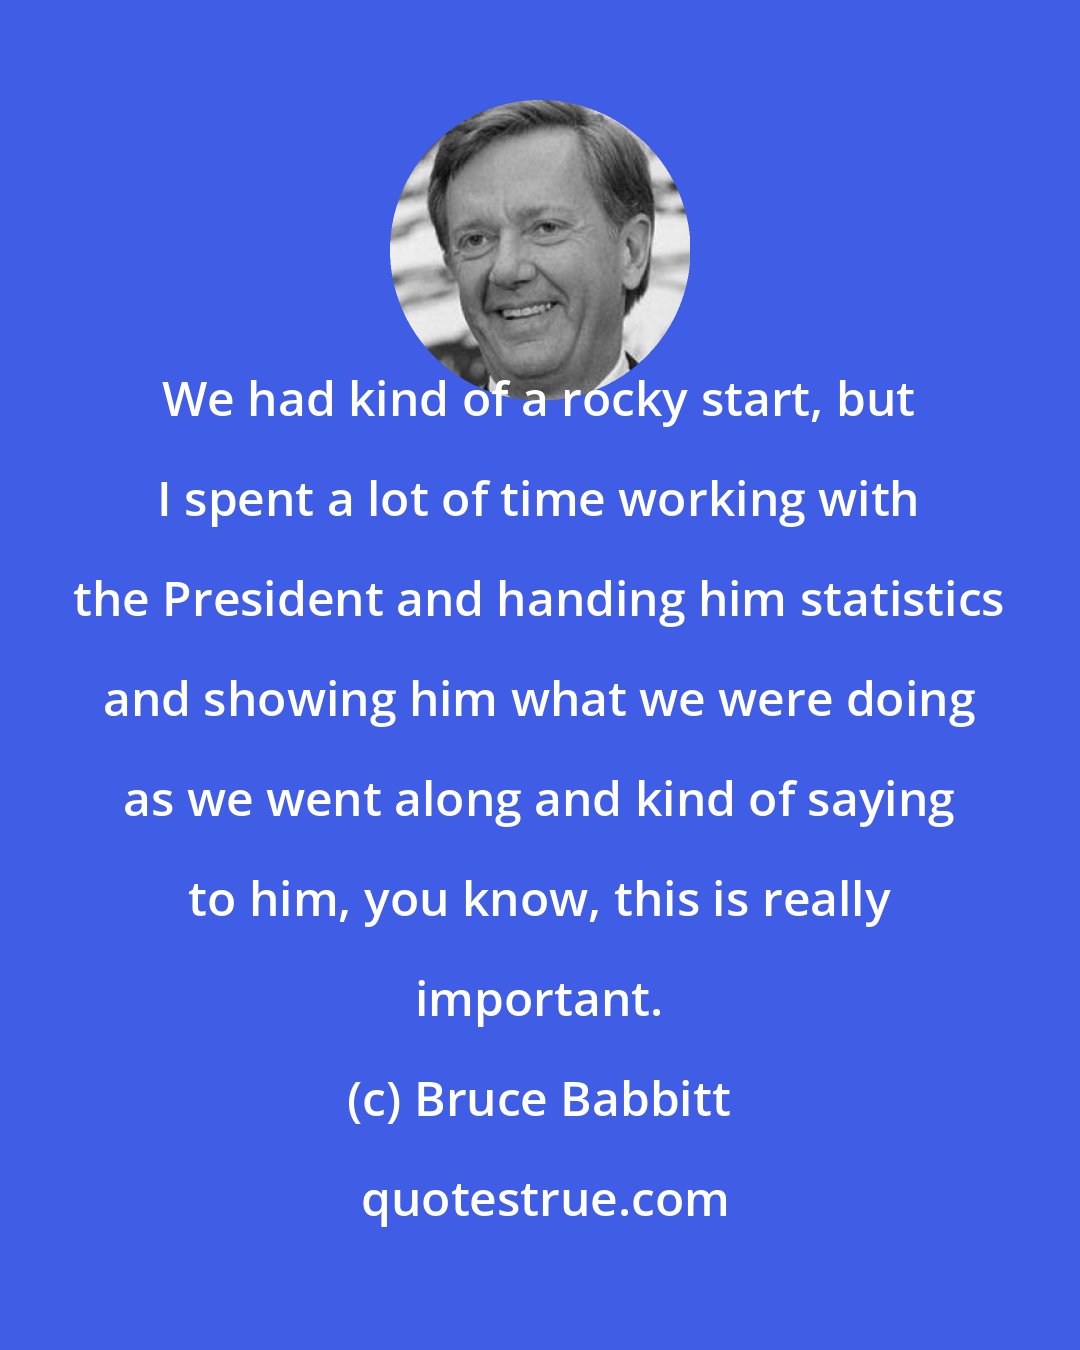 Bruce Babbitt: We had kind of a rocky start, but I spent a lot of time working with the President and handing him statistics and showing him what we were doing as we went along and kind of saying to him, you know, this is really important.